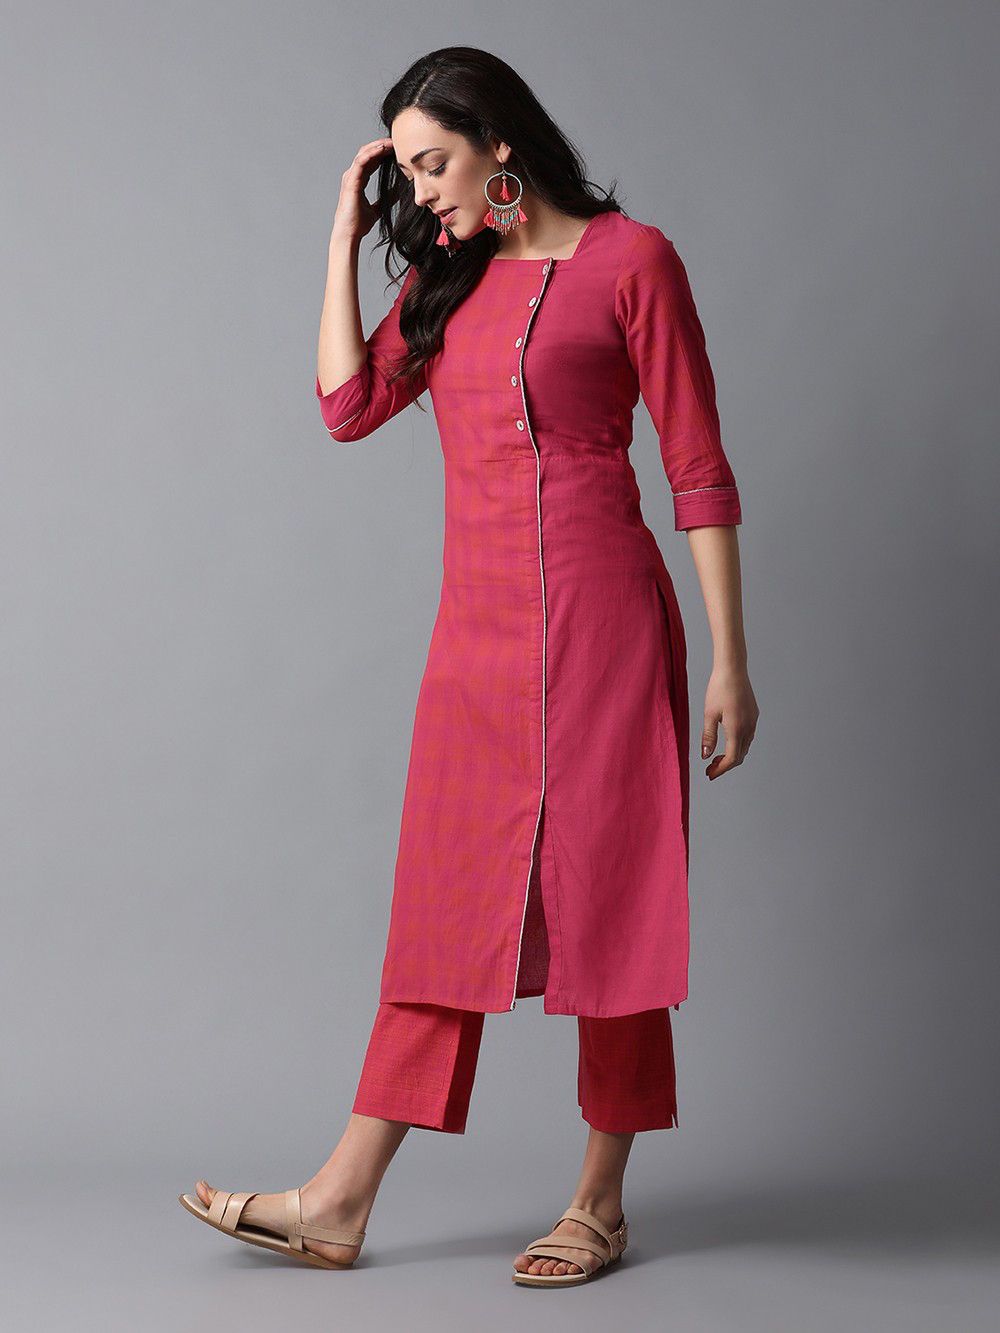 230 Latest Kurti Neck Designs For Salwar Suit 2020 Images With Patterns